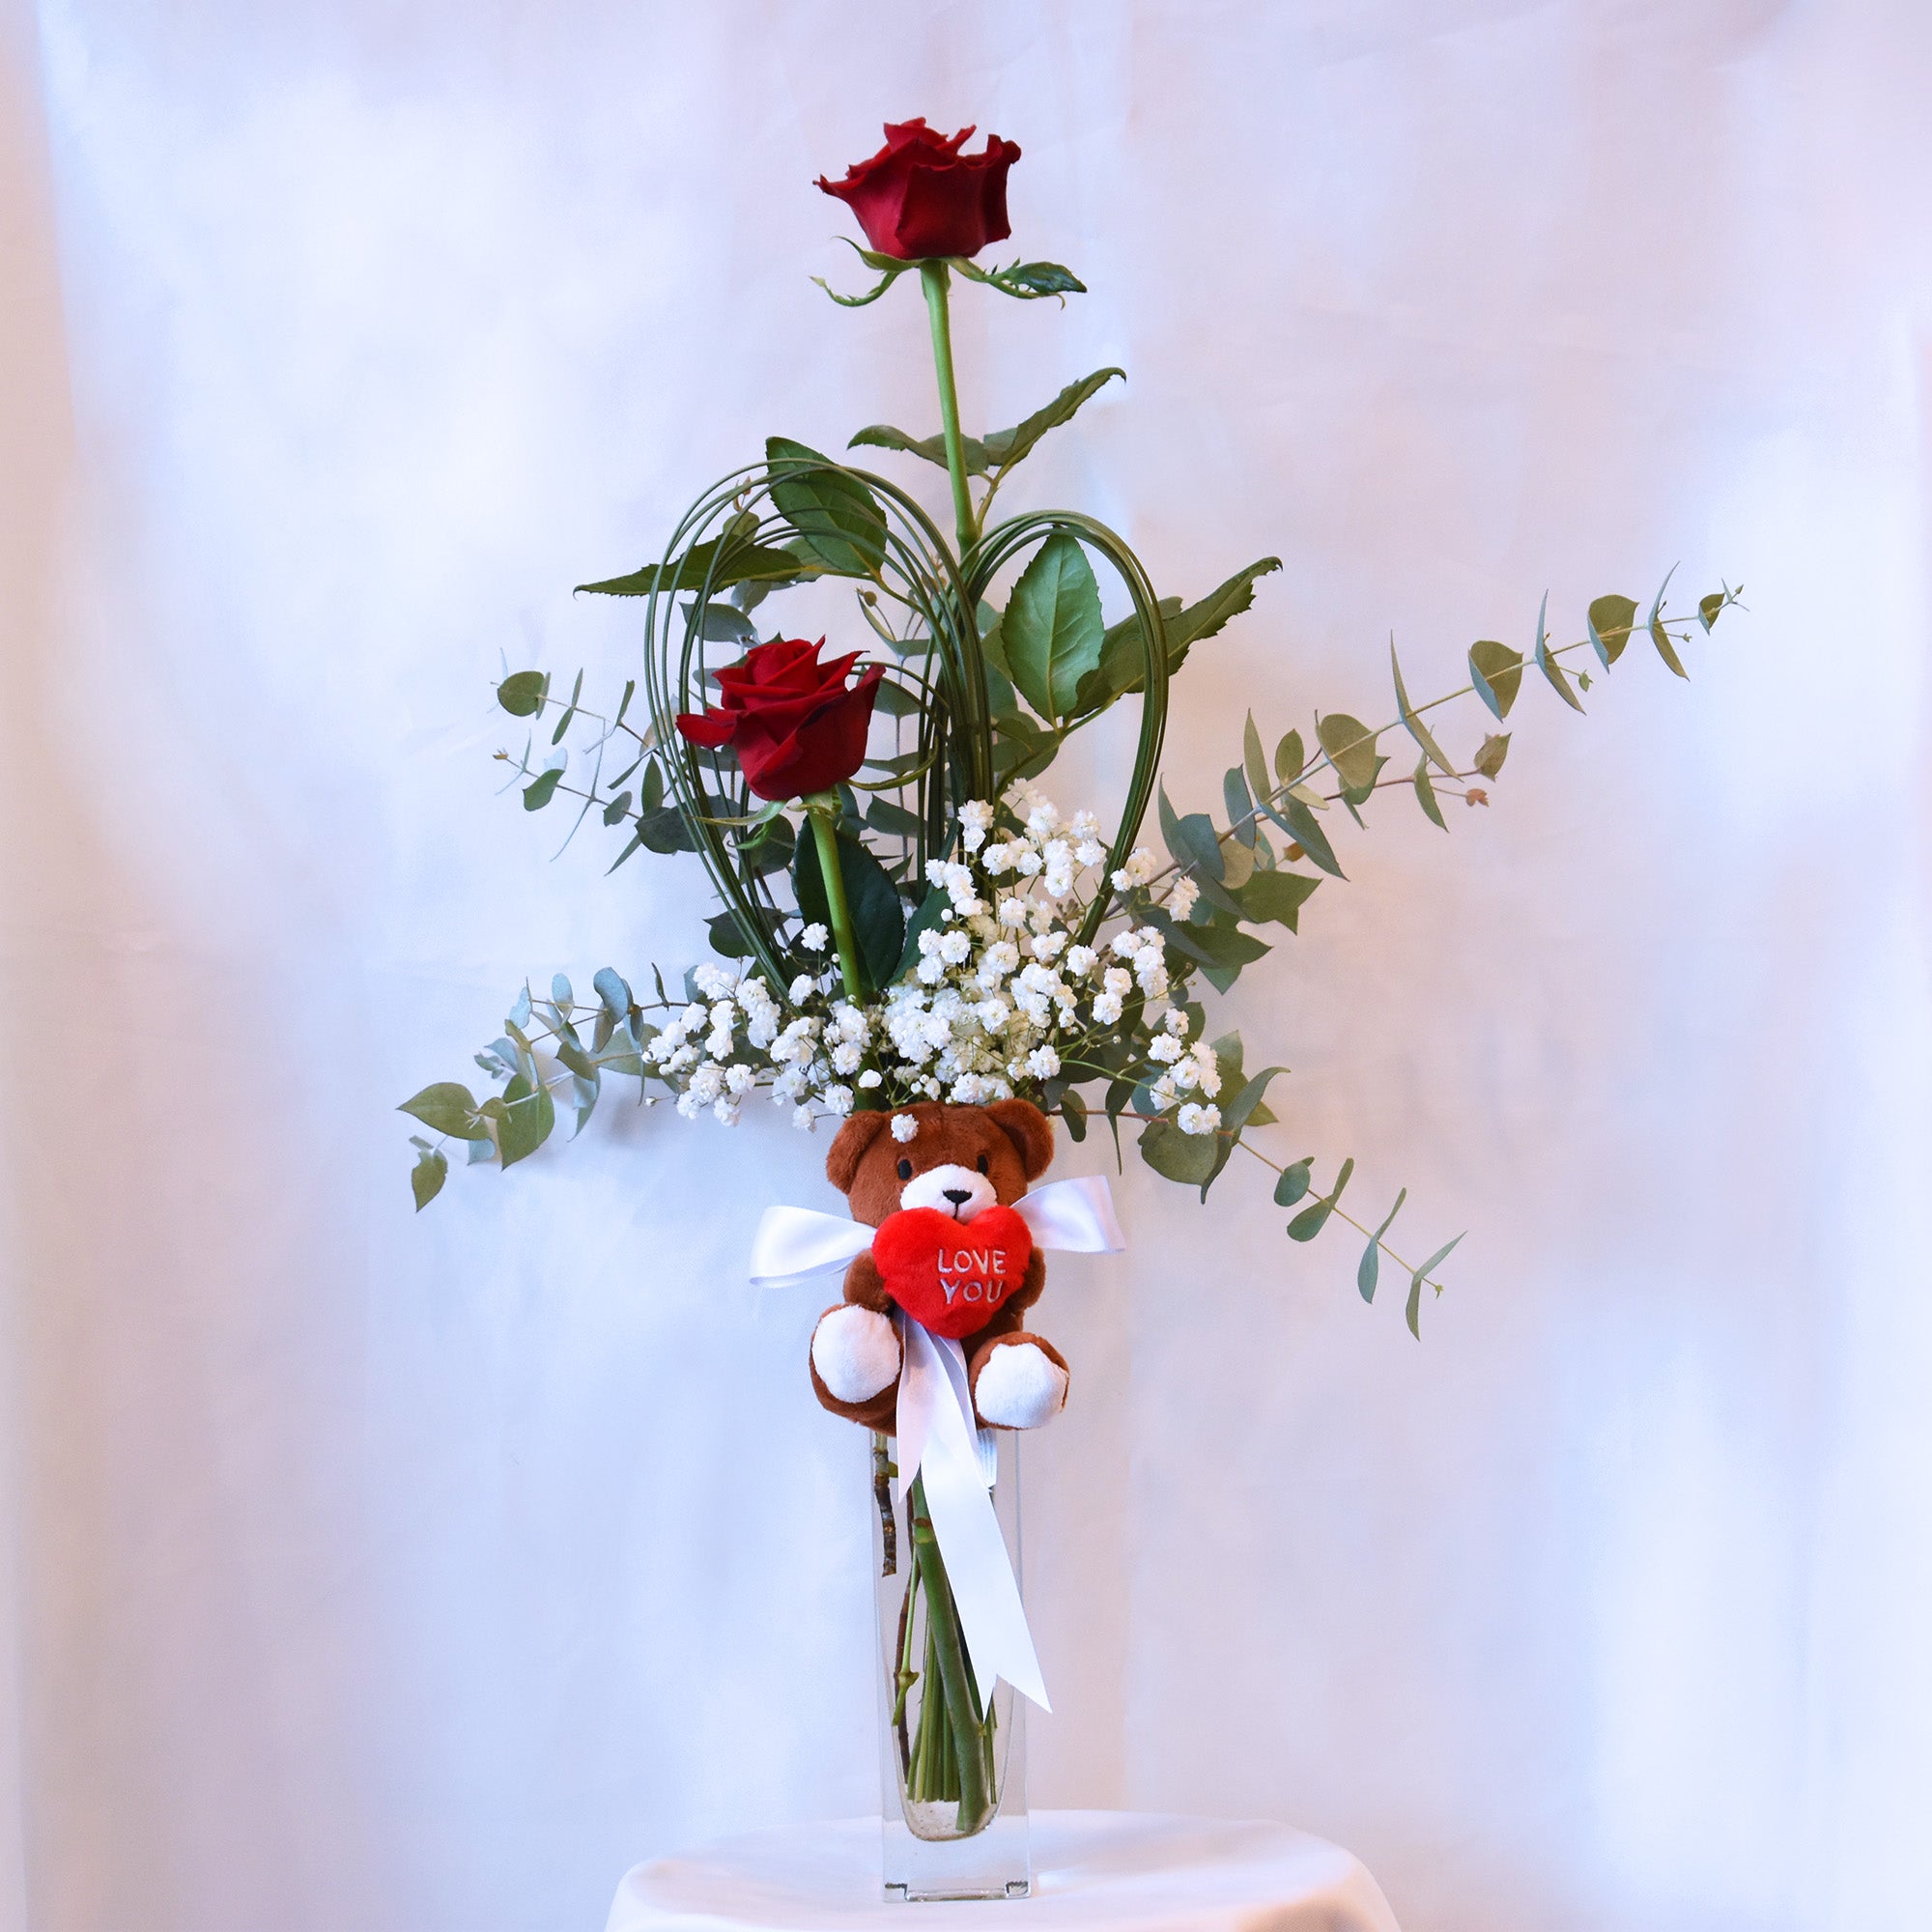 Valentine's Day Flowers - Two Red Roses + Teddy + Vase!